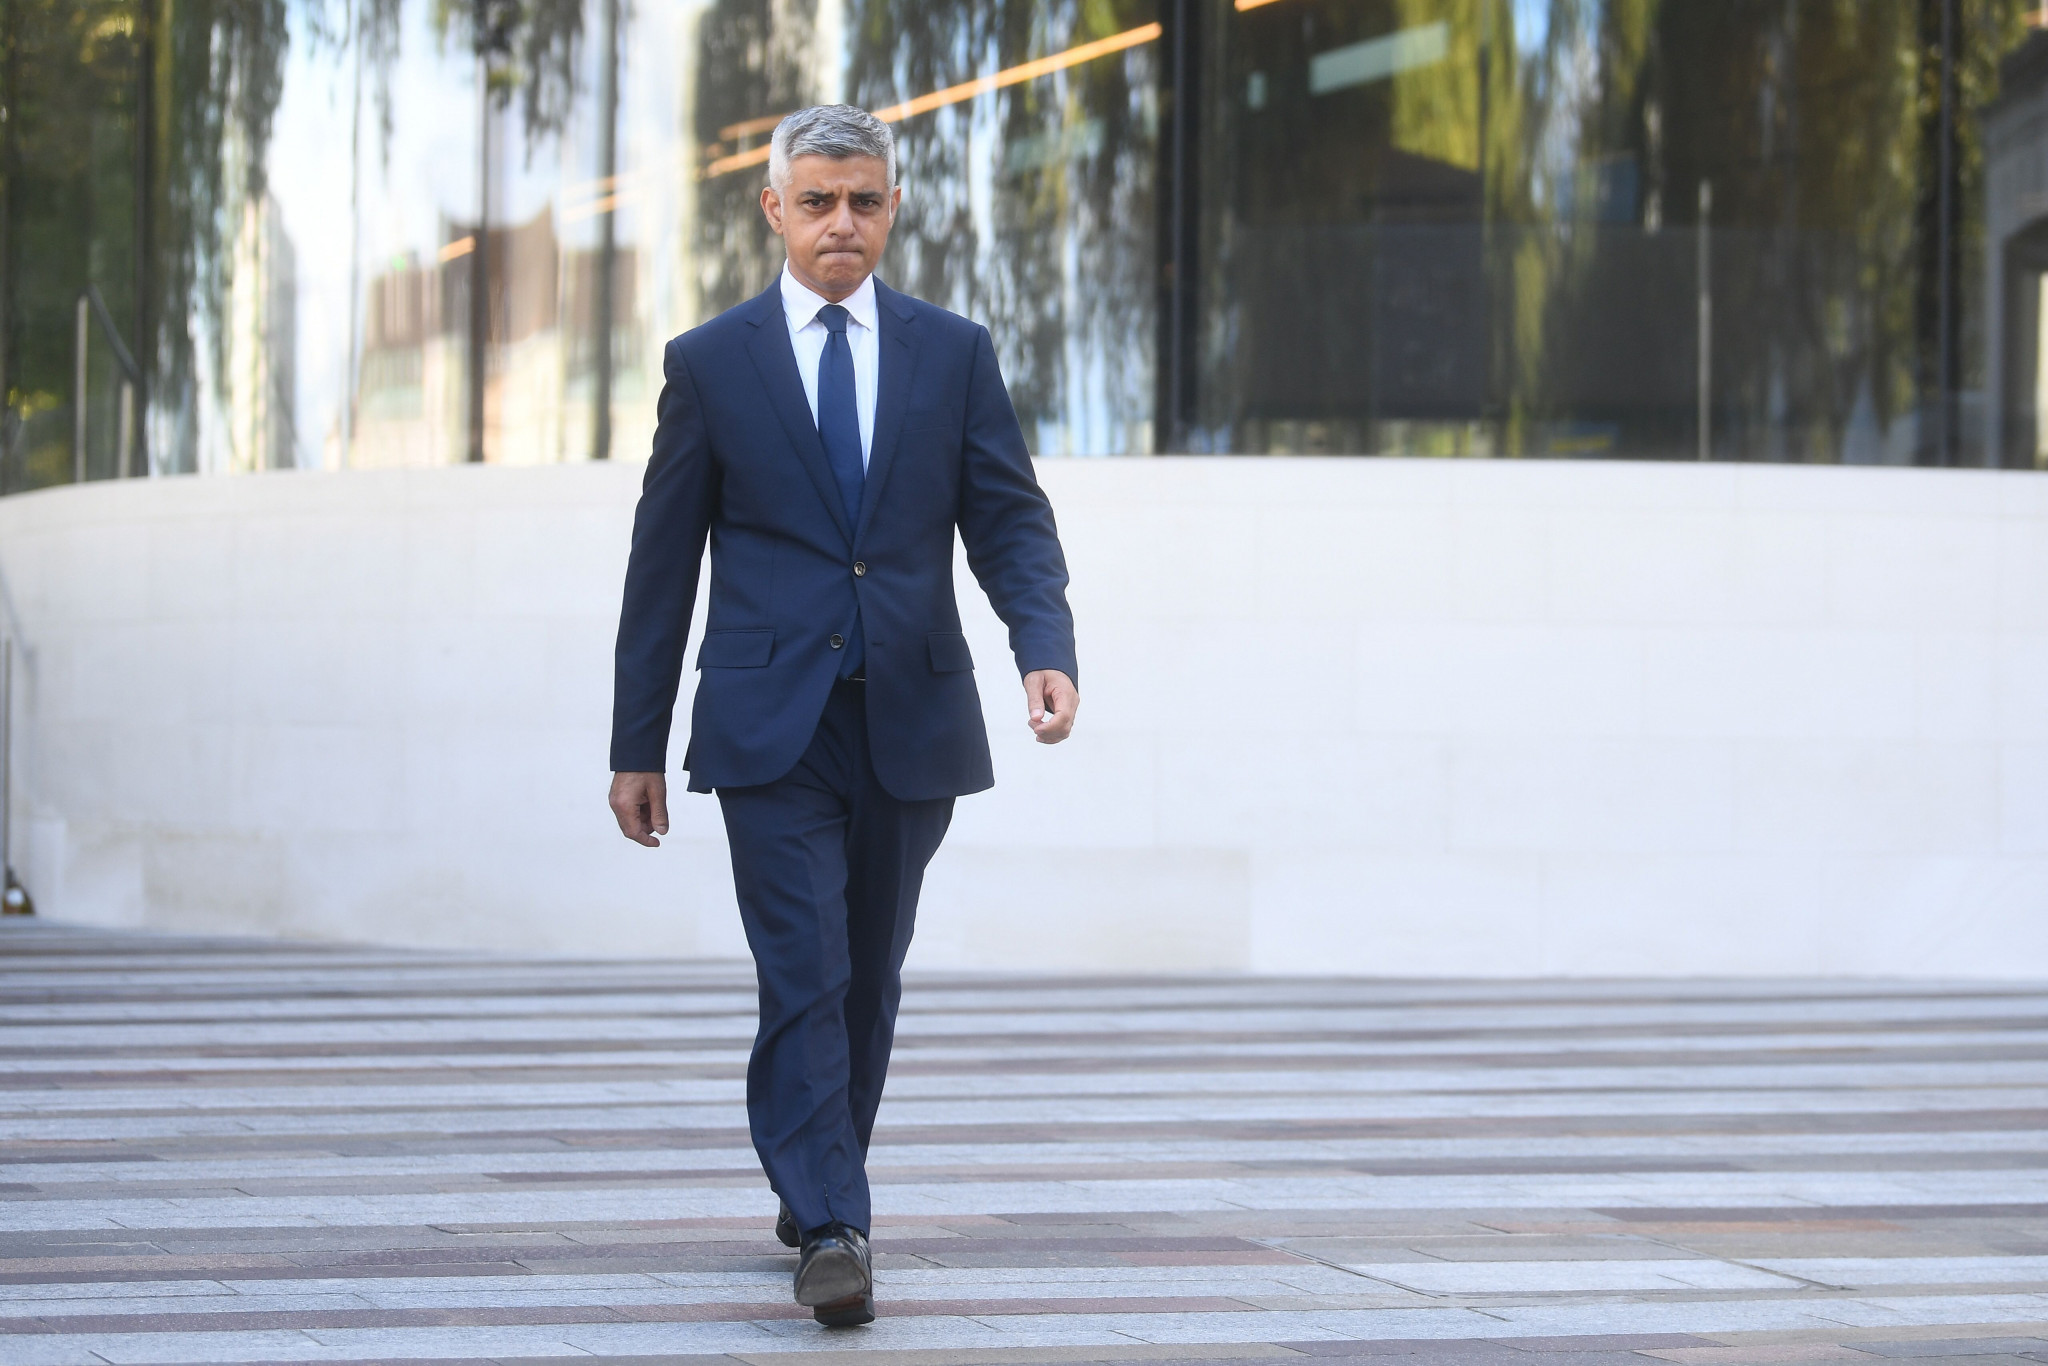 London Mayor signs esports deal in bid to combat youth unemployment